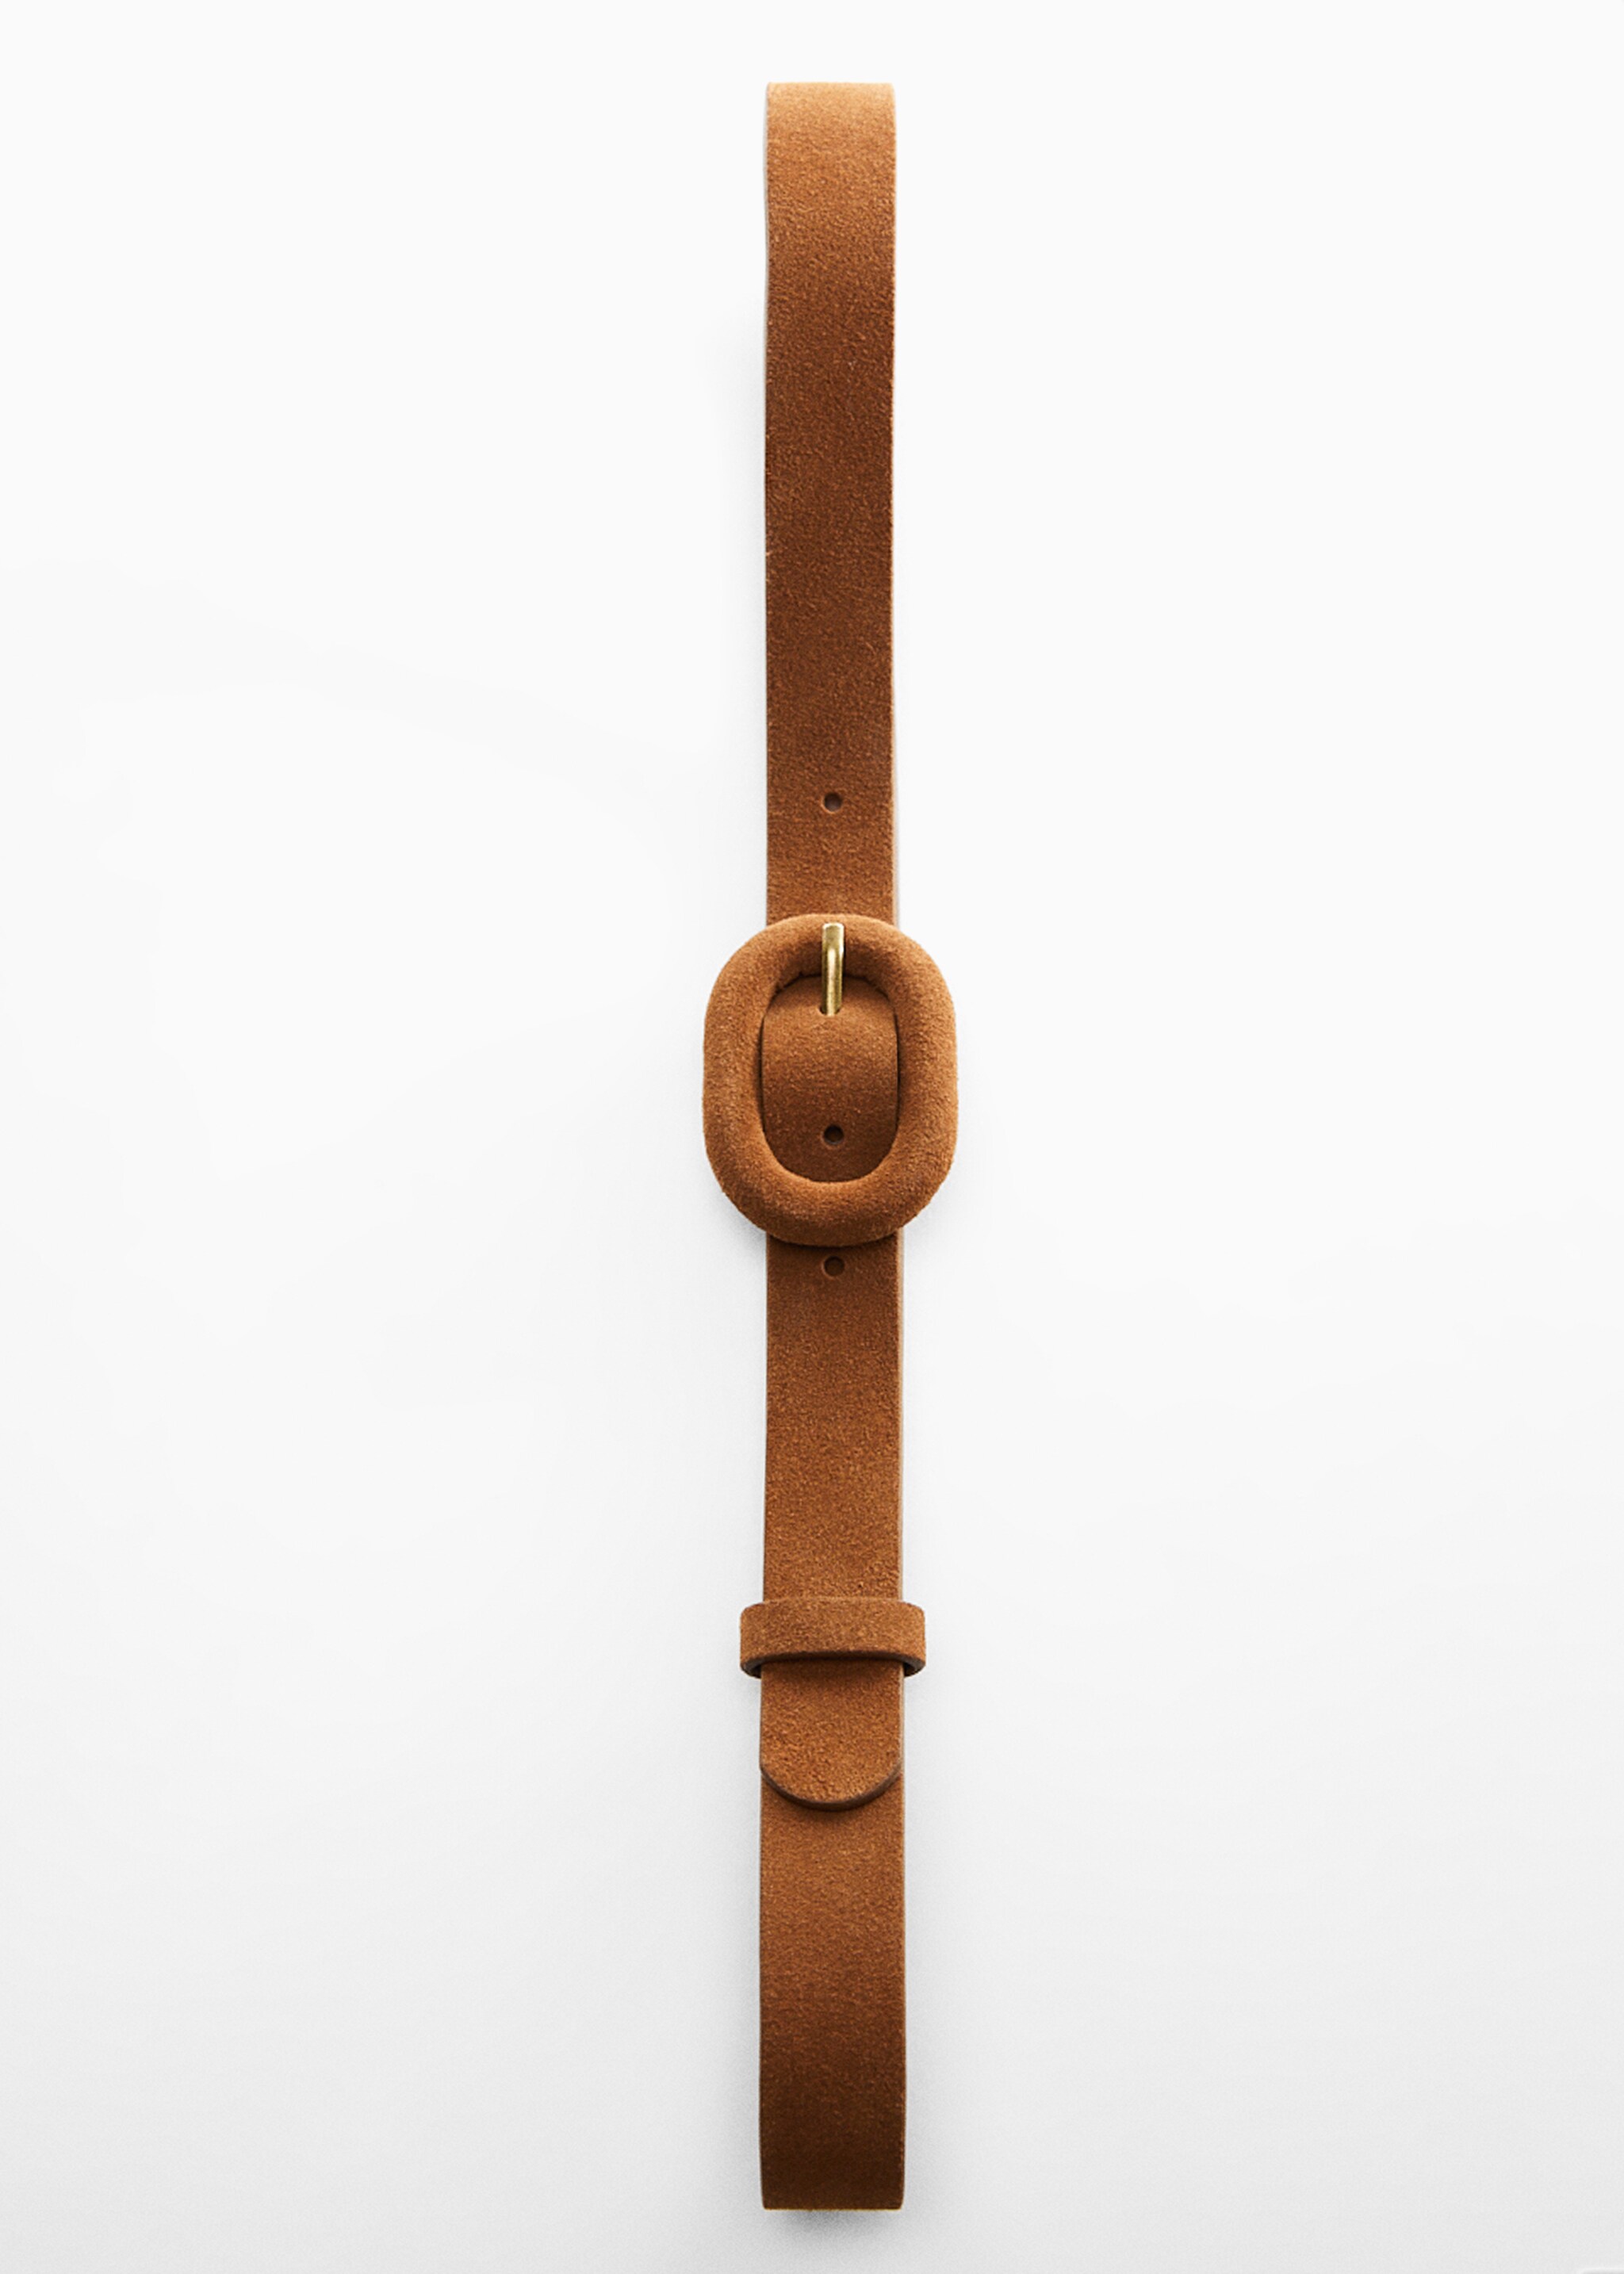 Leather belt with wide buckle - Details of the article 5